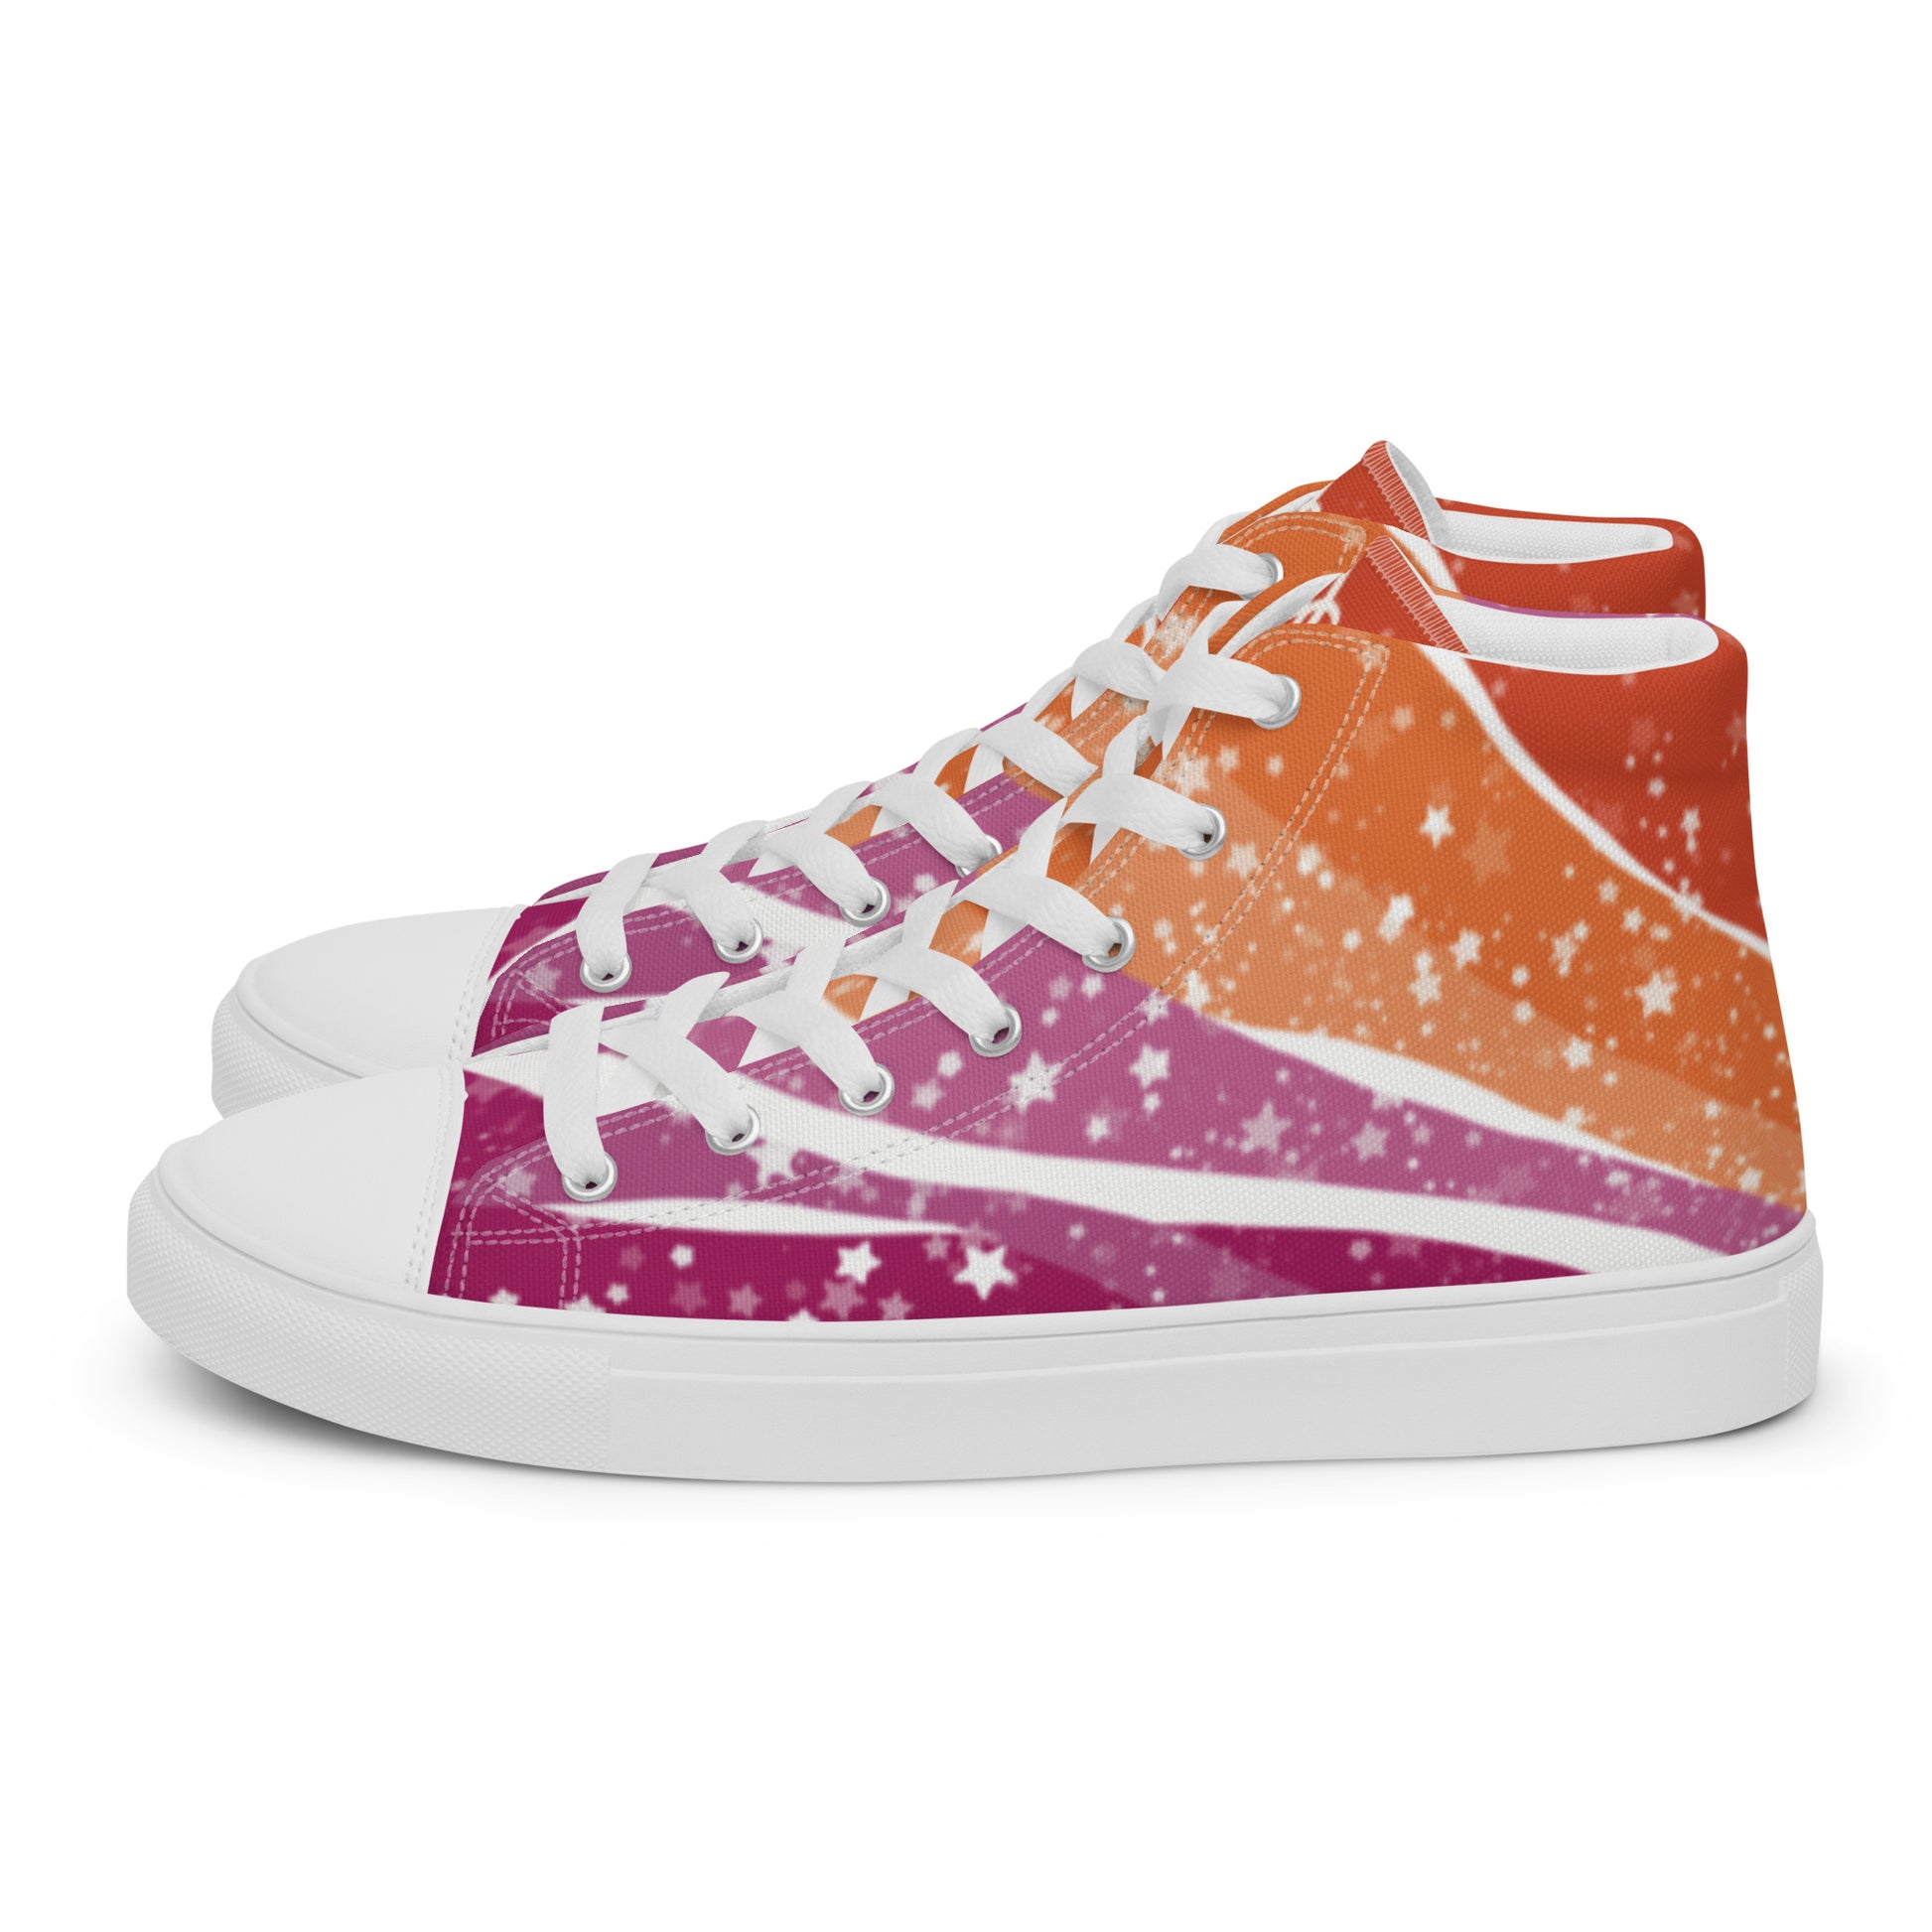 Left view: A pair of high top shoes with ribbons of lesbian flag colors and stars coming from the heel and getting larger across the shoe to the laces.